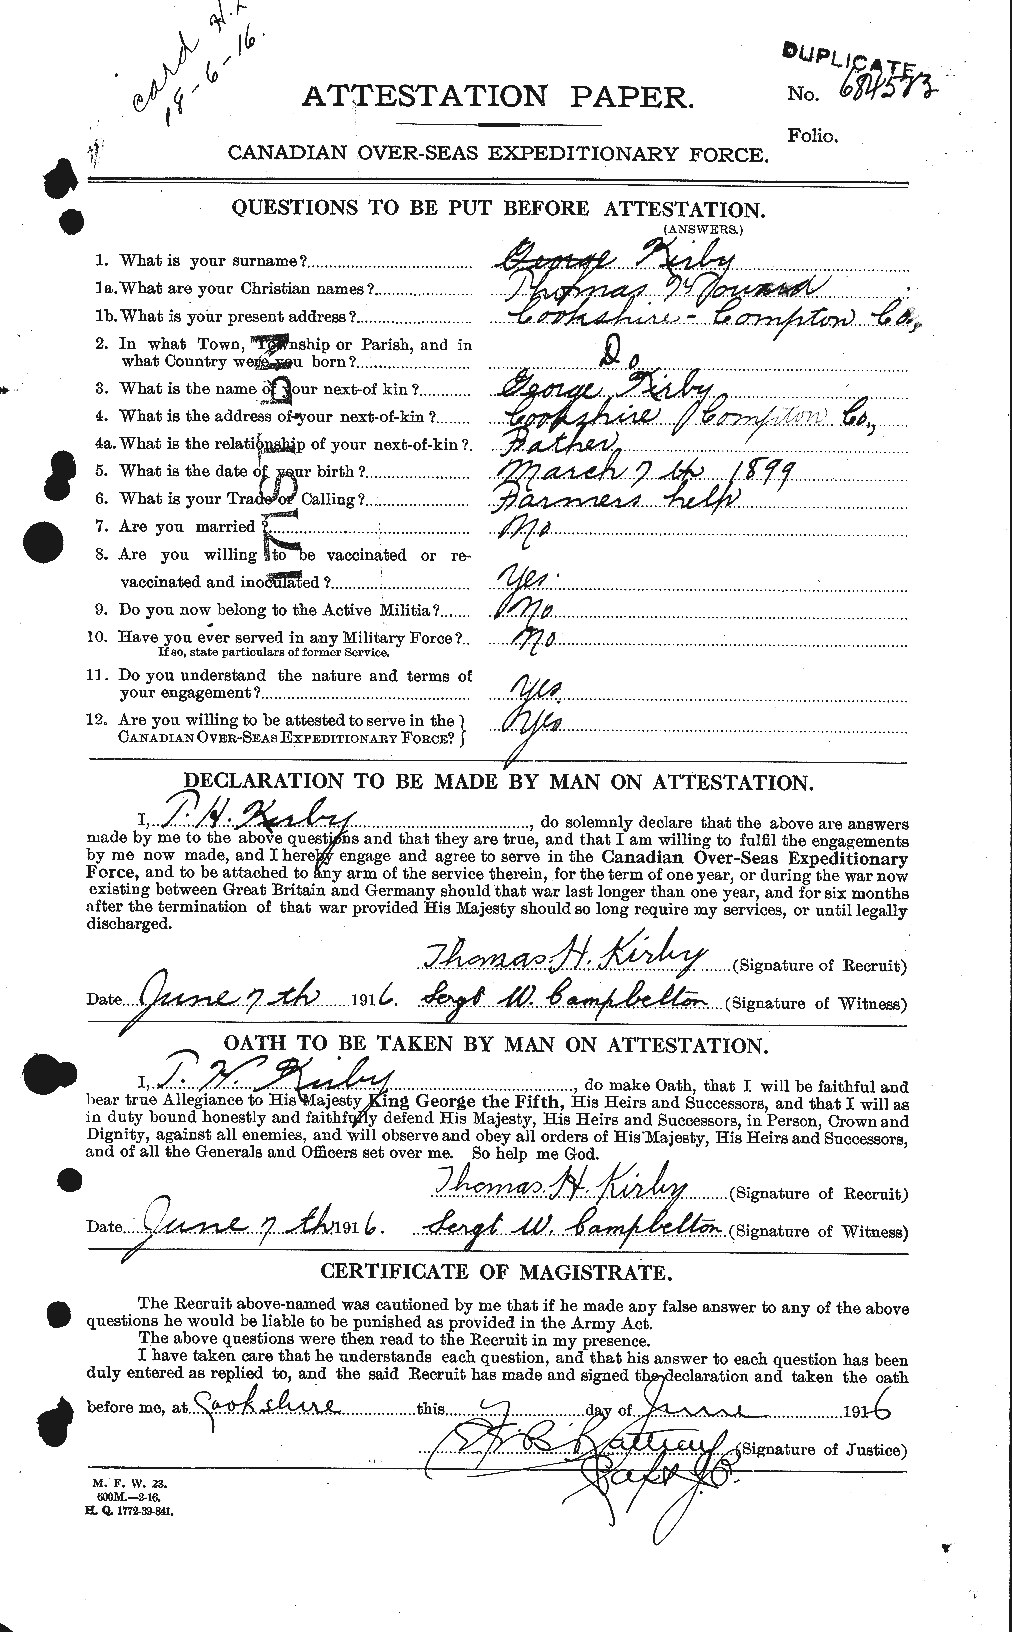 Personnel Records of the First World War - CEF 437282a